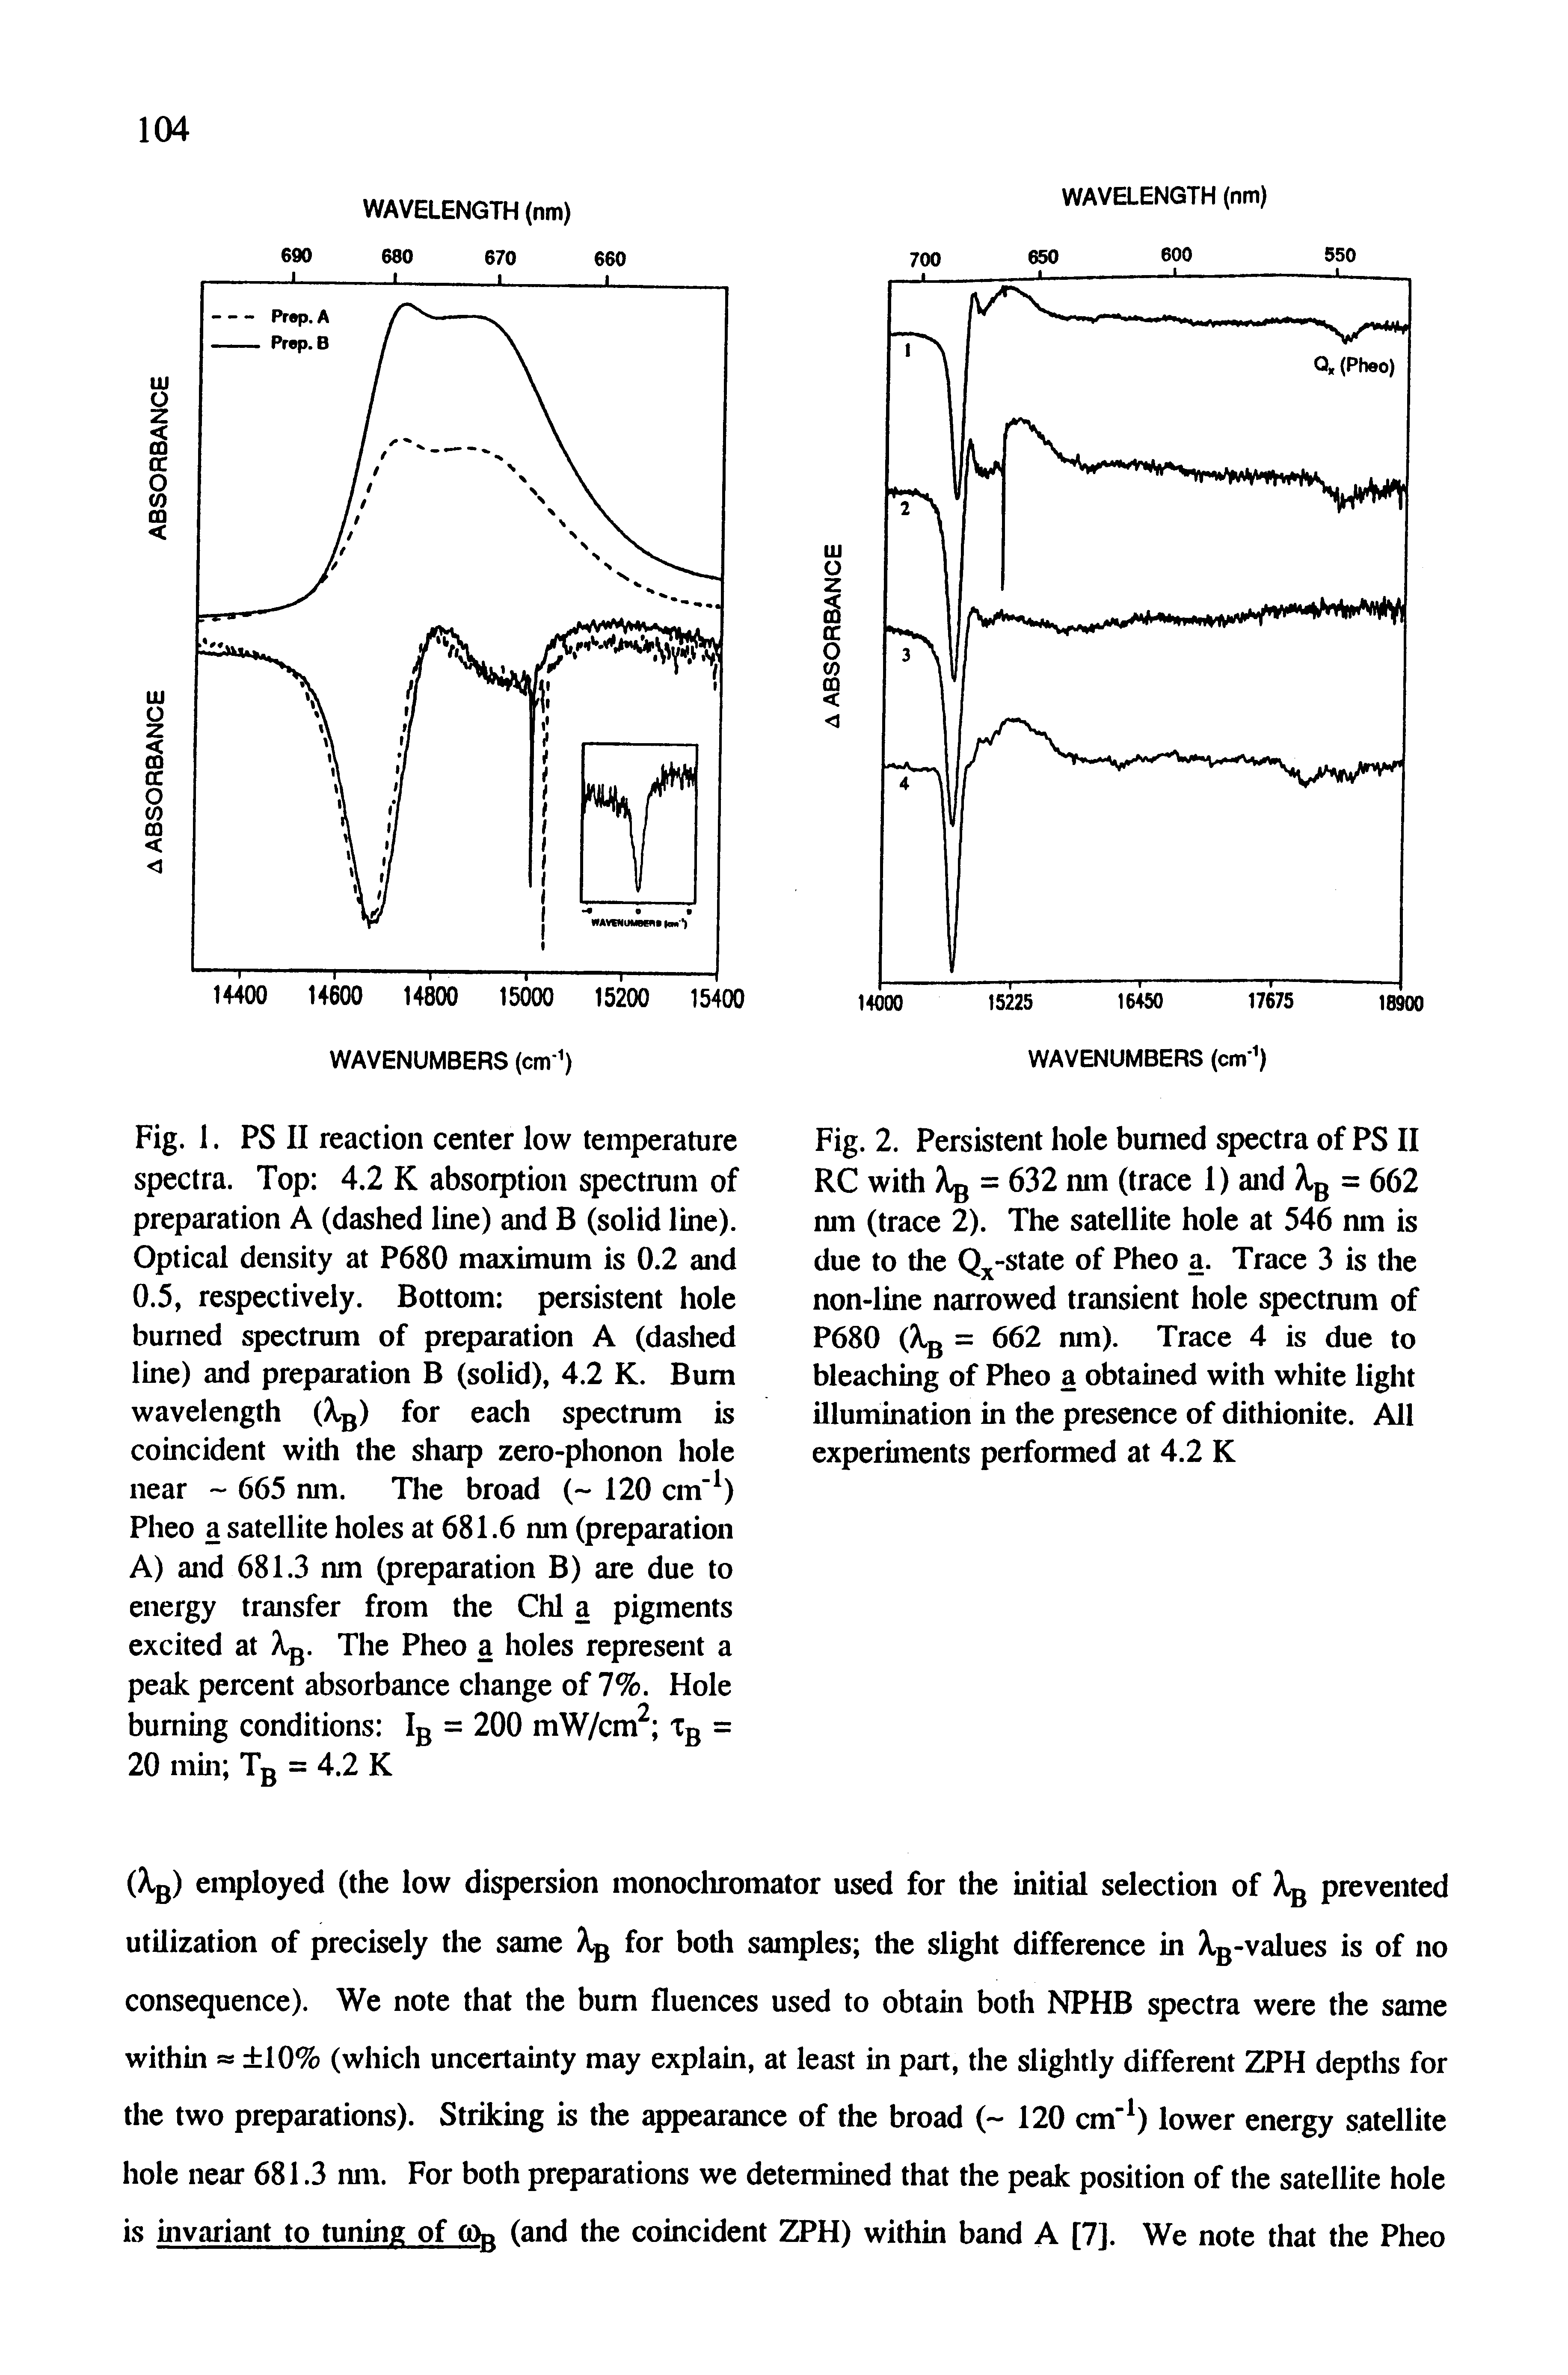 Fig. 1. PS II reaction center low temperature spectra. Top 4.2 K absorption spectrum of preparation A (dashed line) and B (solid line). Optical density at P680 maximum is 0.2 and 0.5, respectively. Bottom persistent hole burned spectrum of preparation A (dashed line) and preparation B (solid), 4.2 K. Bum wavelength (A. ) for each spectrum is coincident with the sharp zero-phonon hole near 665 nm. The broad ( 120 cm" ) Pheo a satellite holes at 681.6 nm (preparation A) and 681.3 nm (preparation B) are due to energy transfer from the Chi a pigments excited at Xg. The Pheo a holes represent a peak percent absorbance change of 7%. Hole burning conditions Ig = 200 mW/cm Tg = 20 min Tg = 4.2 K...